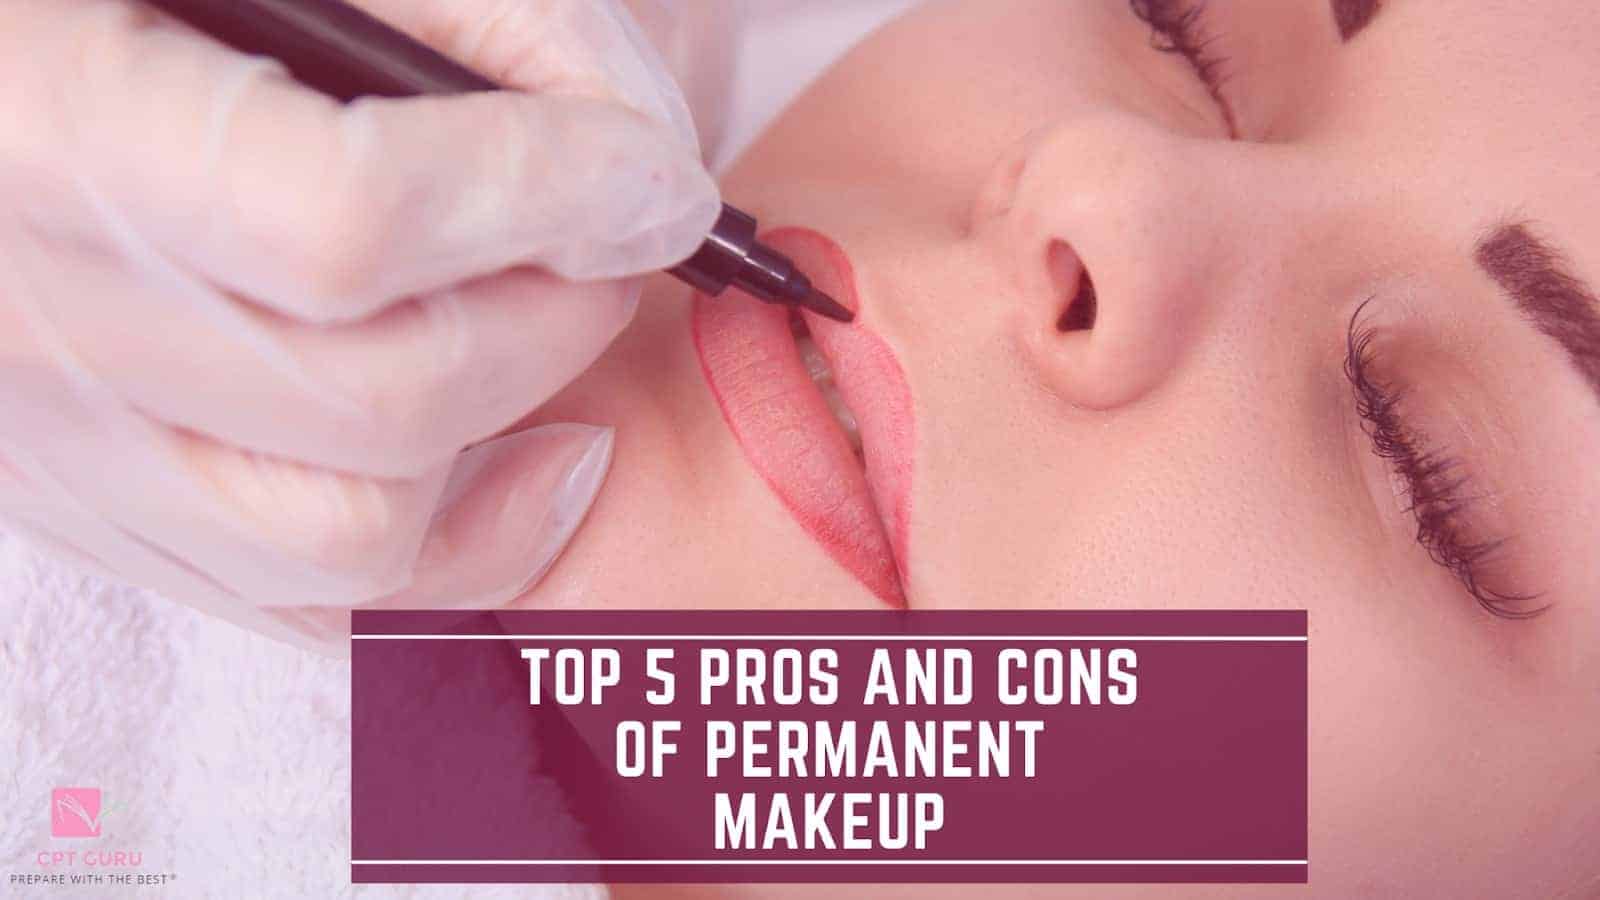 Top 5 Pros and Cons of Permanent Makeup